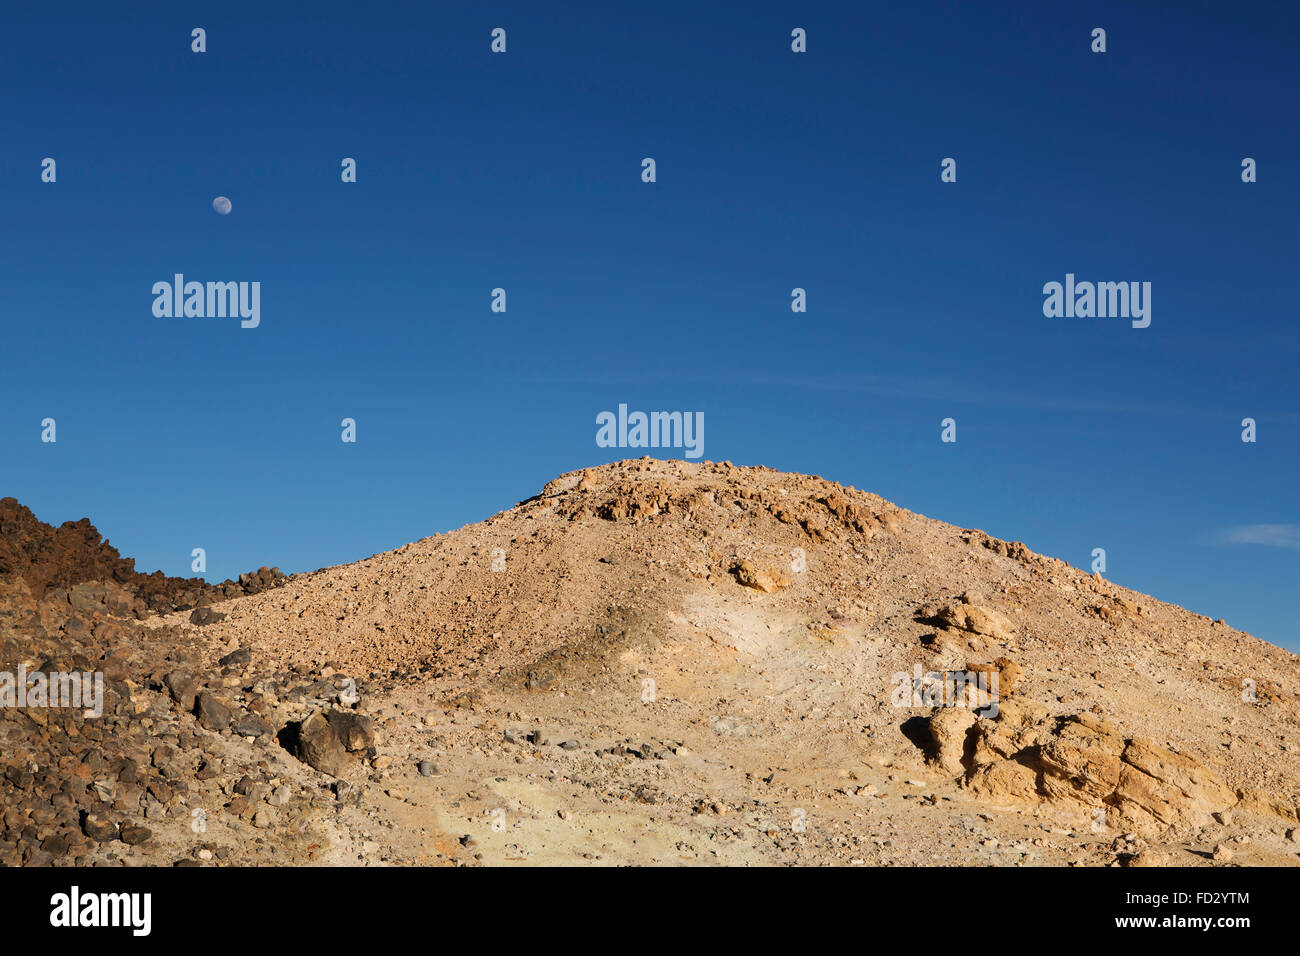 The moon rises above sulphur-laced rock on Mount Teide in Teide National Park on Tenerife, Spain. Stock Photo